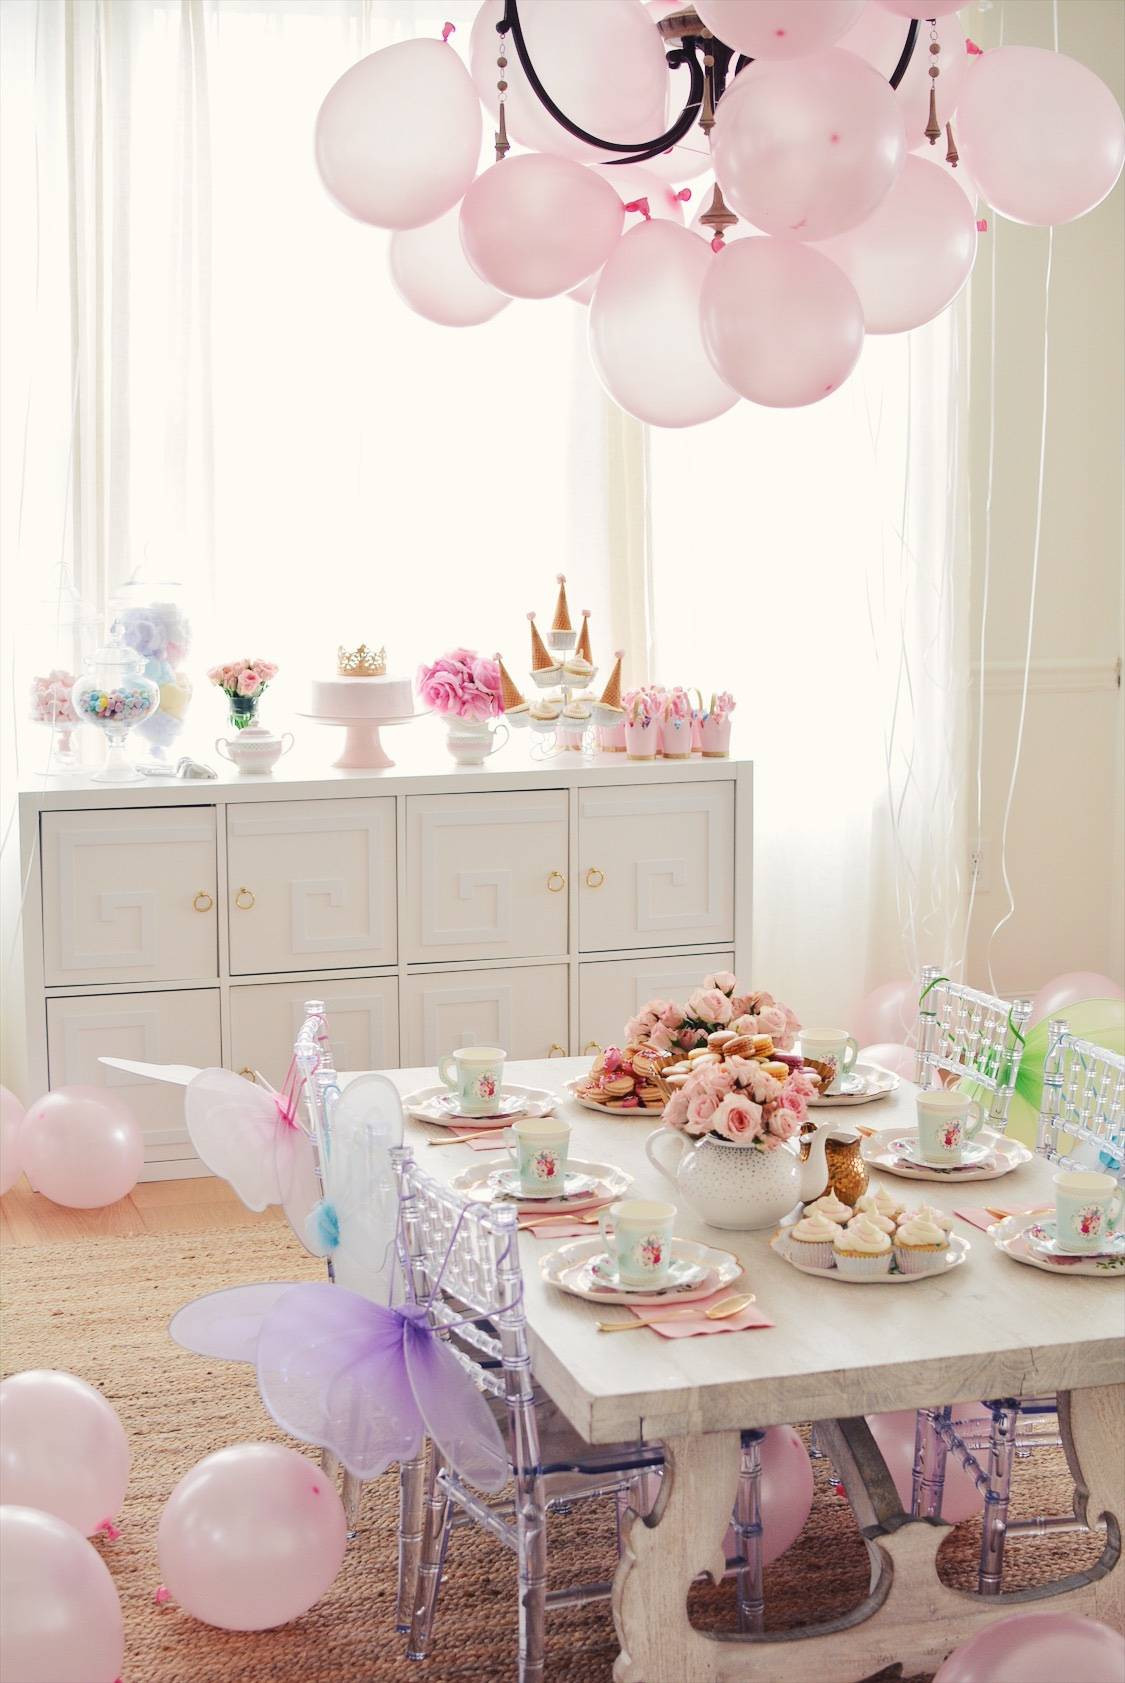 Tea Party Birthday
 Princess Tea Party Birthday Party Ideas for a 3 Year Old